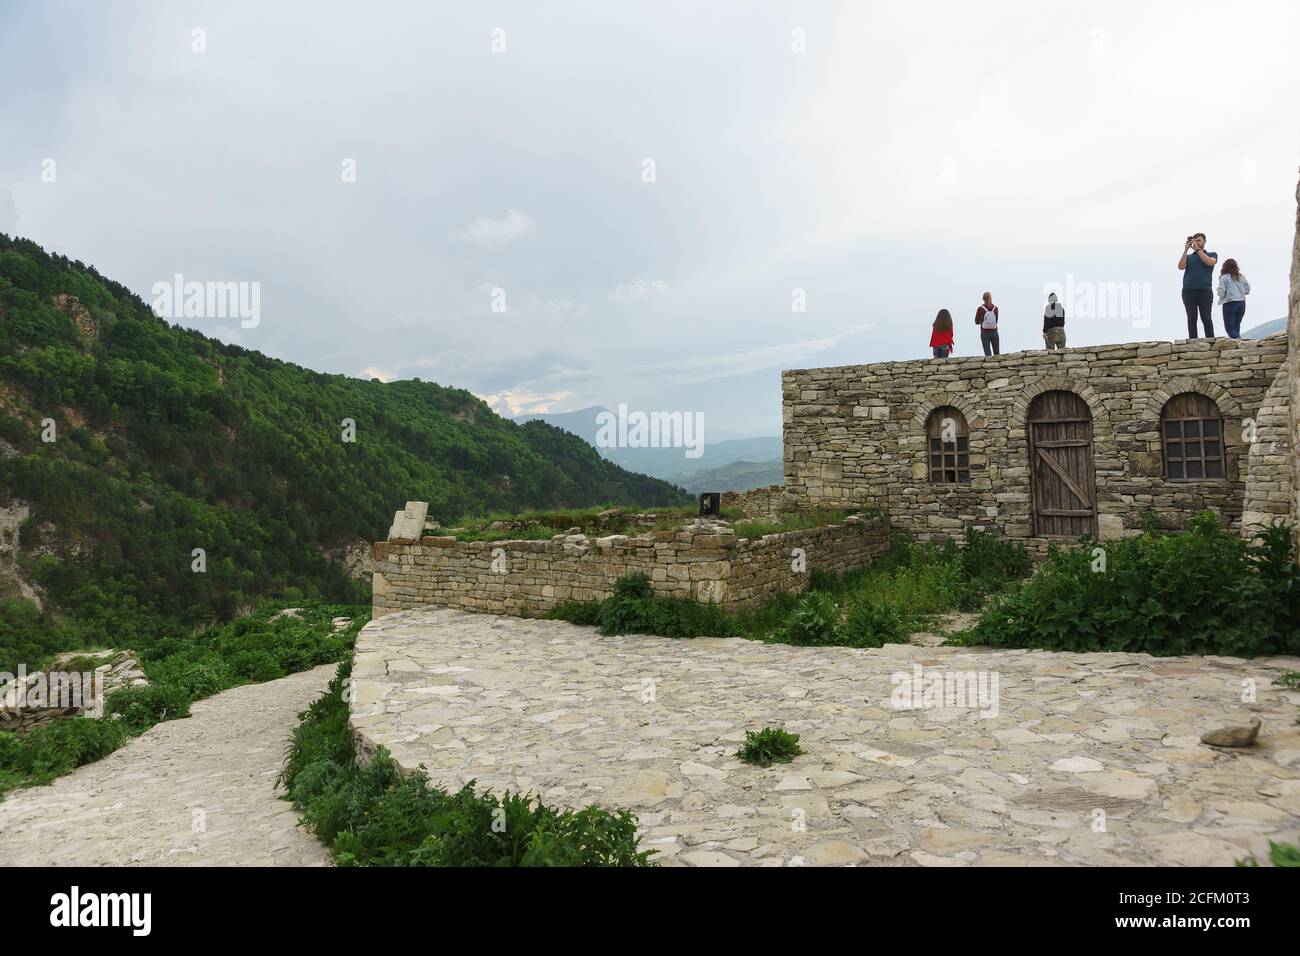 Hoi, Vedensky district, Chechen Republic, Russia - June 01.2019: Tourists visiting the ancient settlement of the guards. Cloudy day in the Caucasus mo Stock Photo